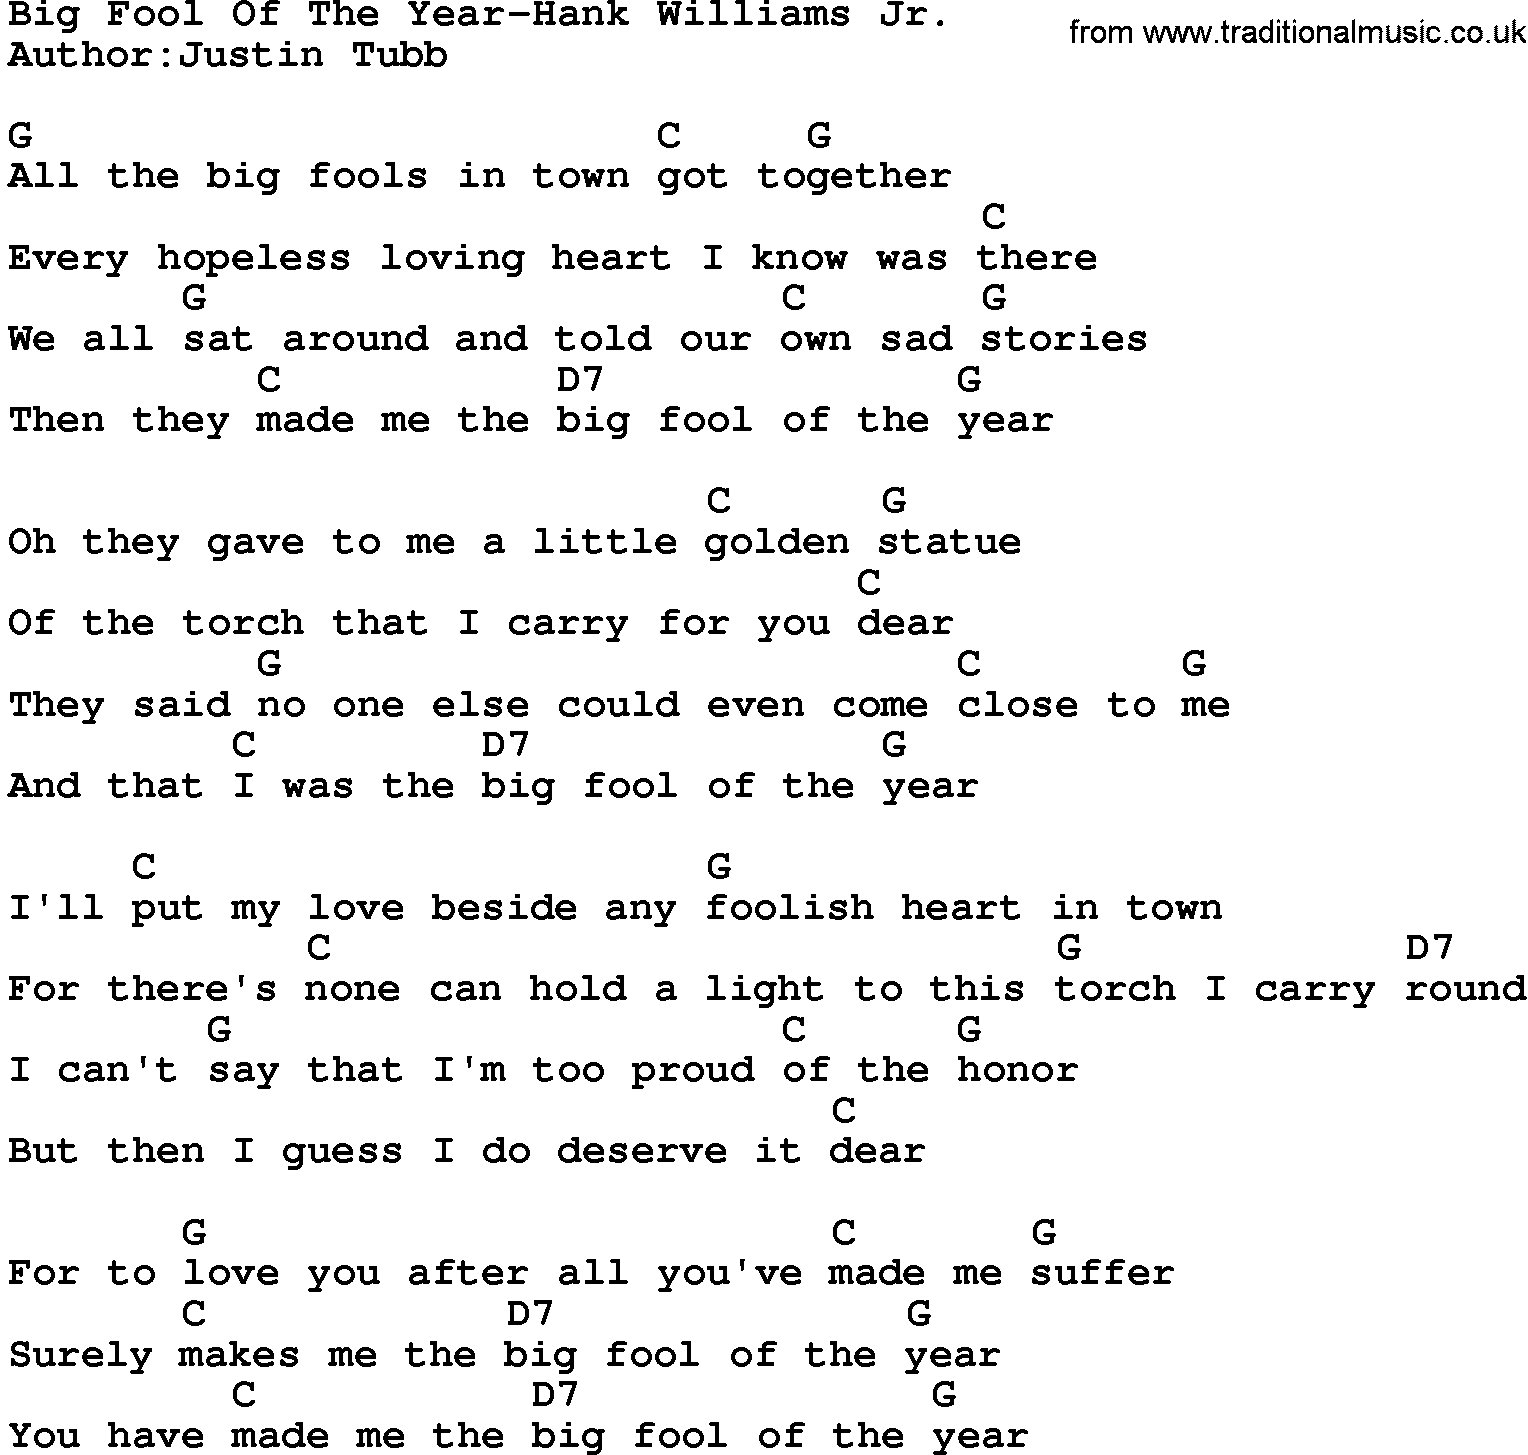 Country music song: Big Fool Of The Year-Hank Williams Jr lyrics and chords